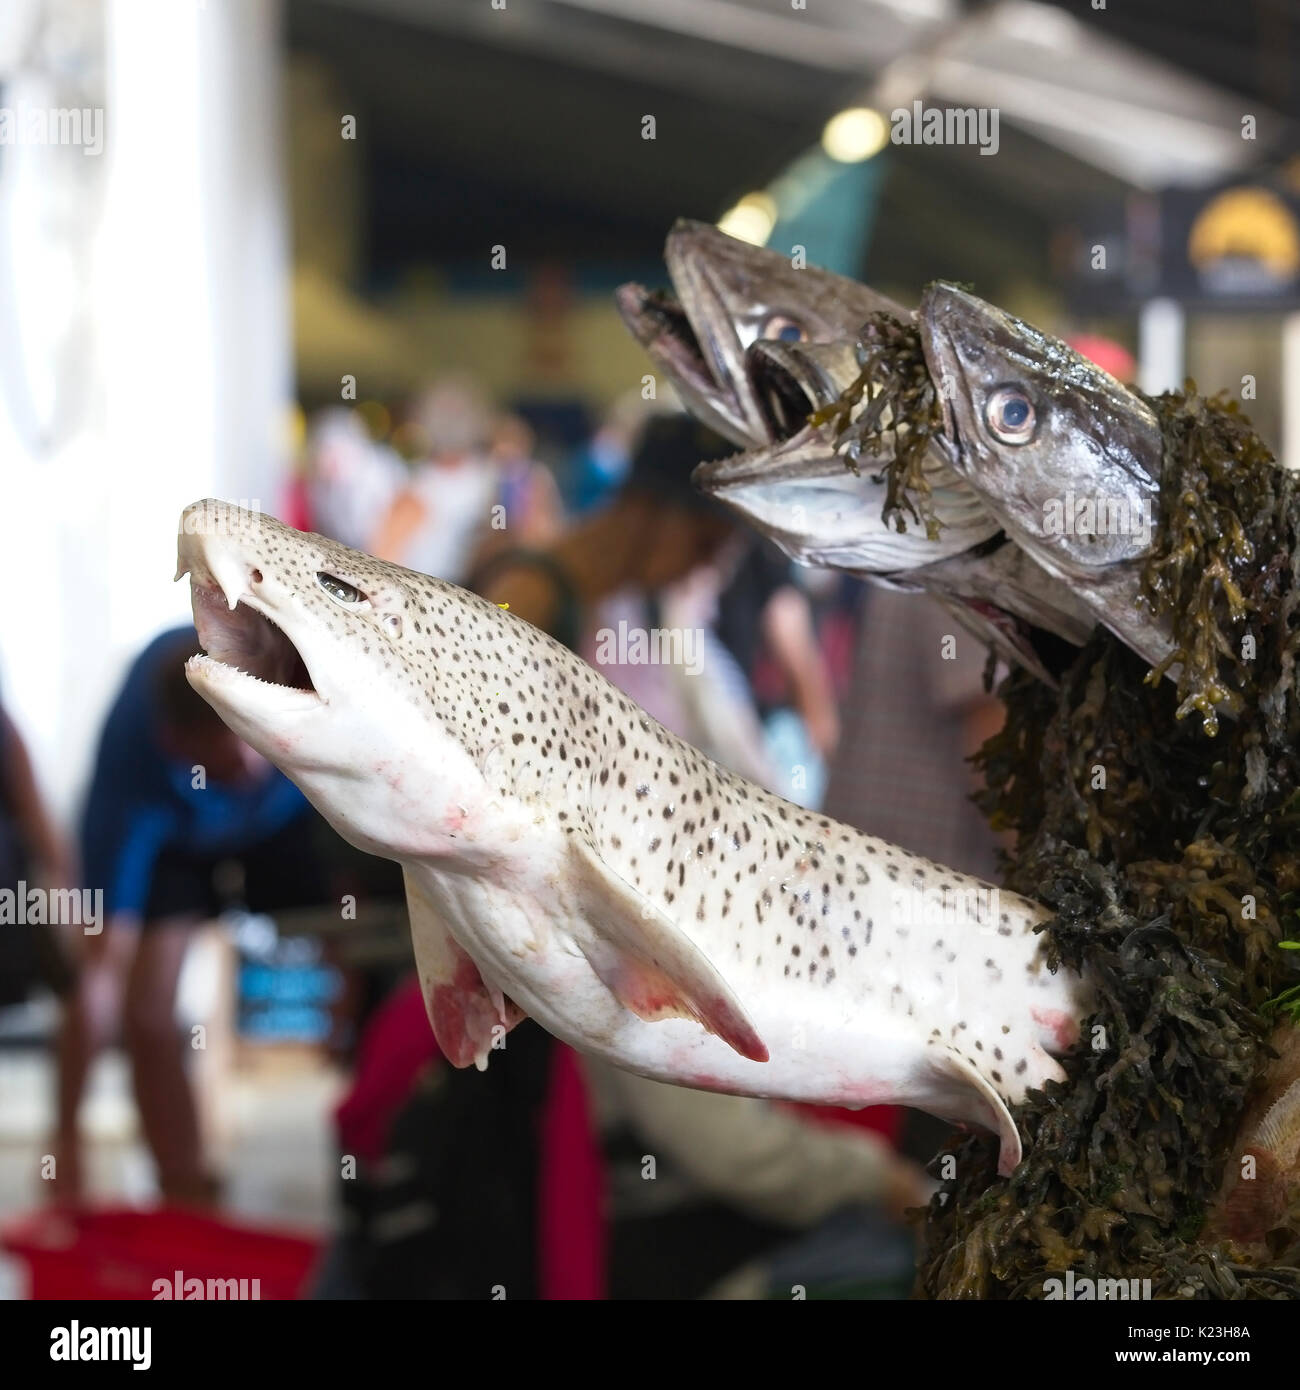 Newlyn, Cornwall, UK. 28th Aug, 2017. Part of the giant fish 'sculpture' at the Newlyn Fish Festival, Newlyn, Cornwall, England, UK. Credit: tony mills/Alamy Live News Stock Photo